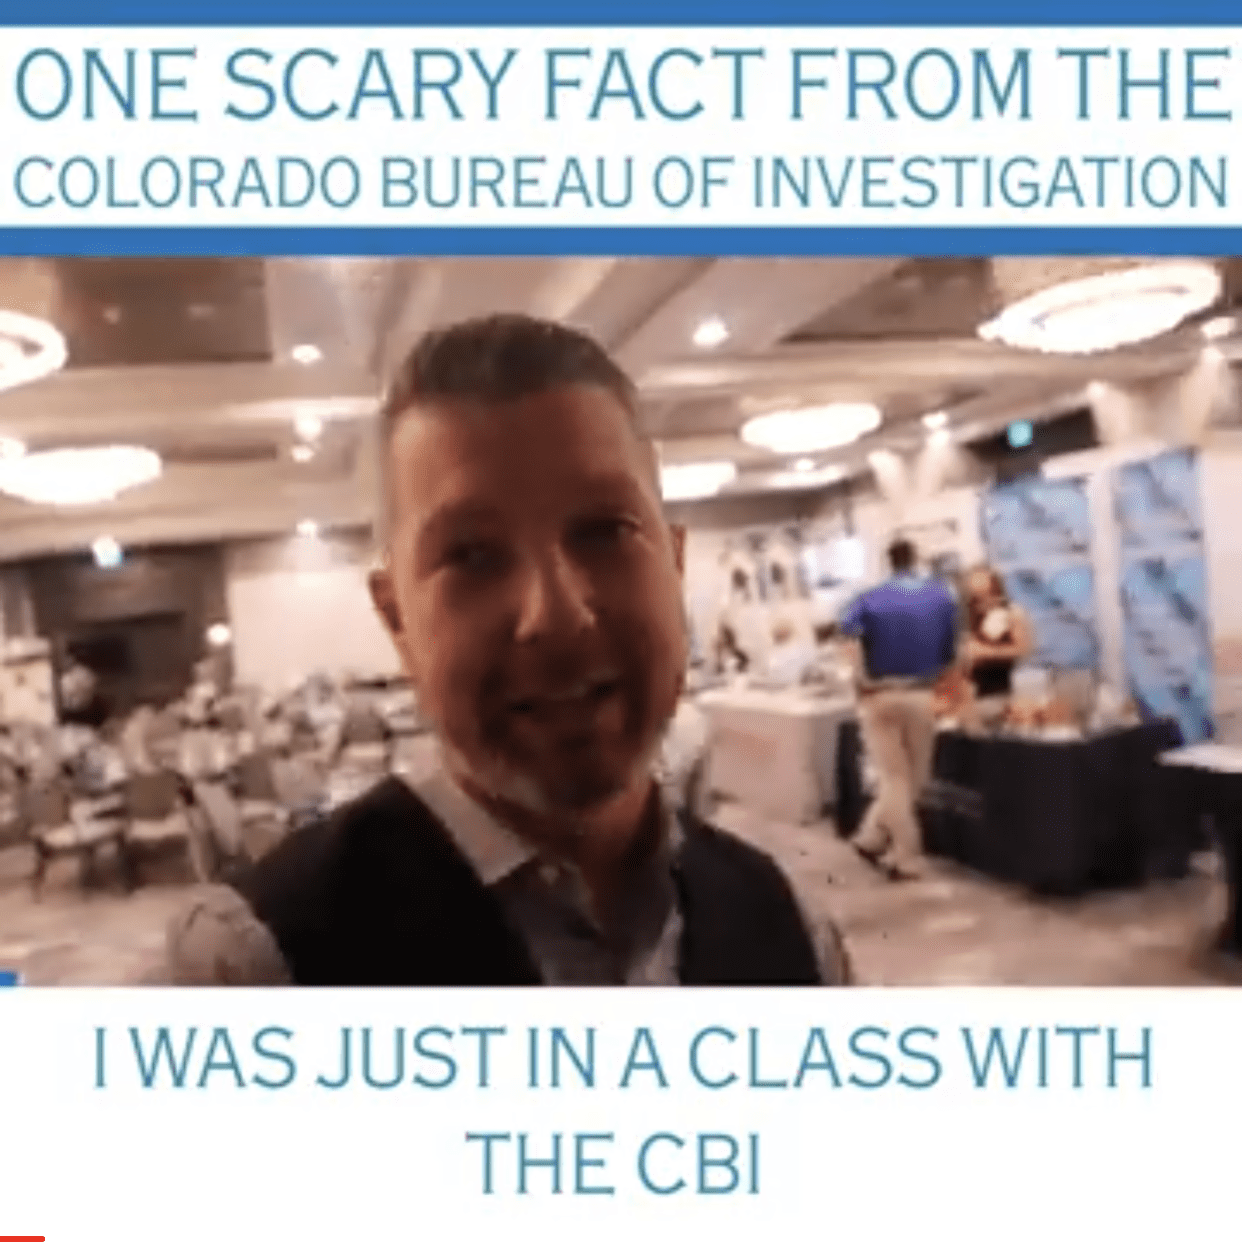 Scary fact from Colorado Bureau of Investigation